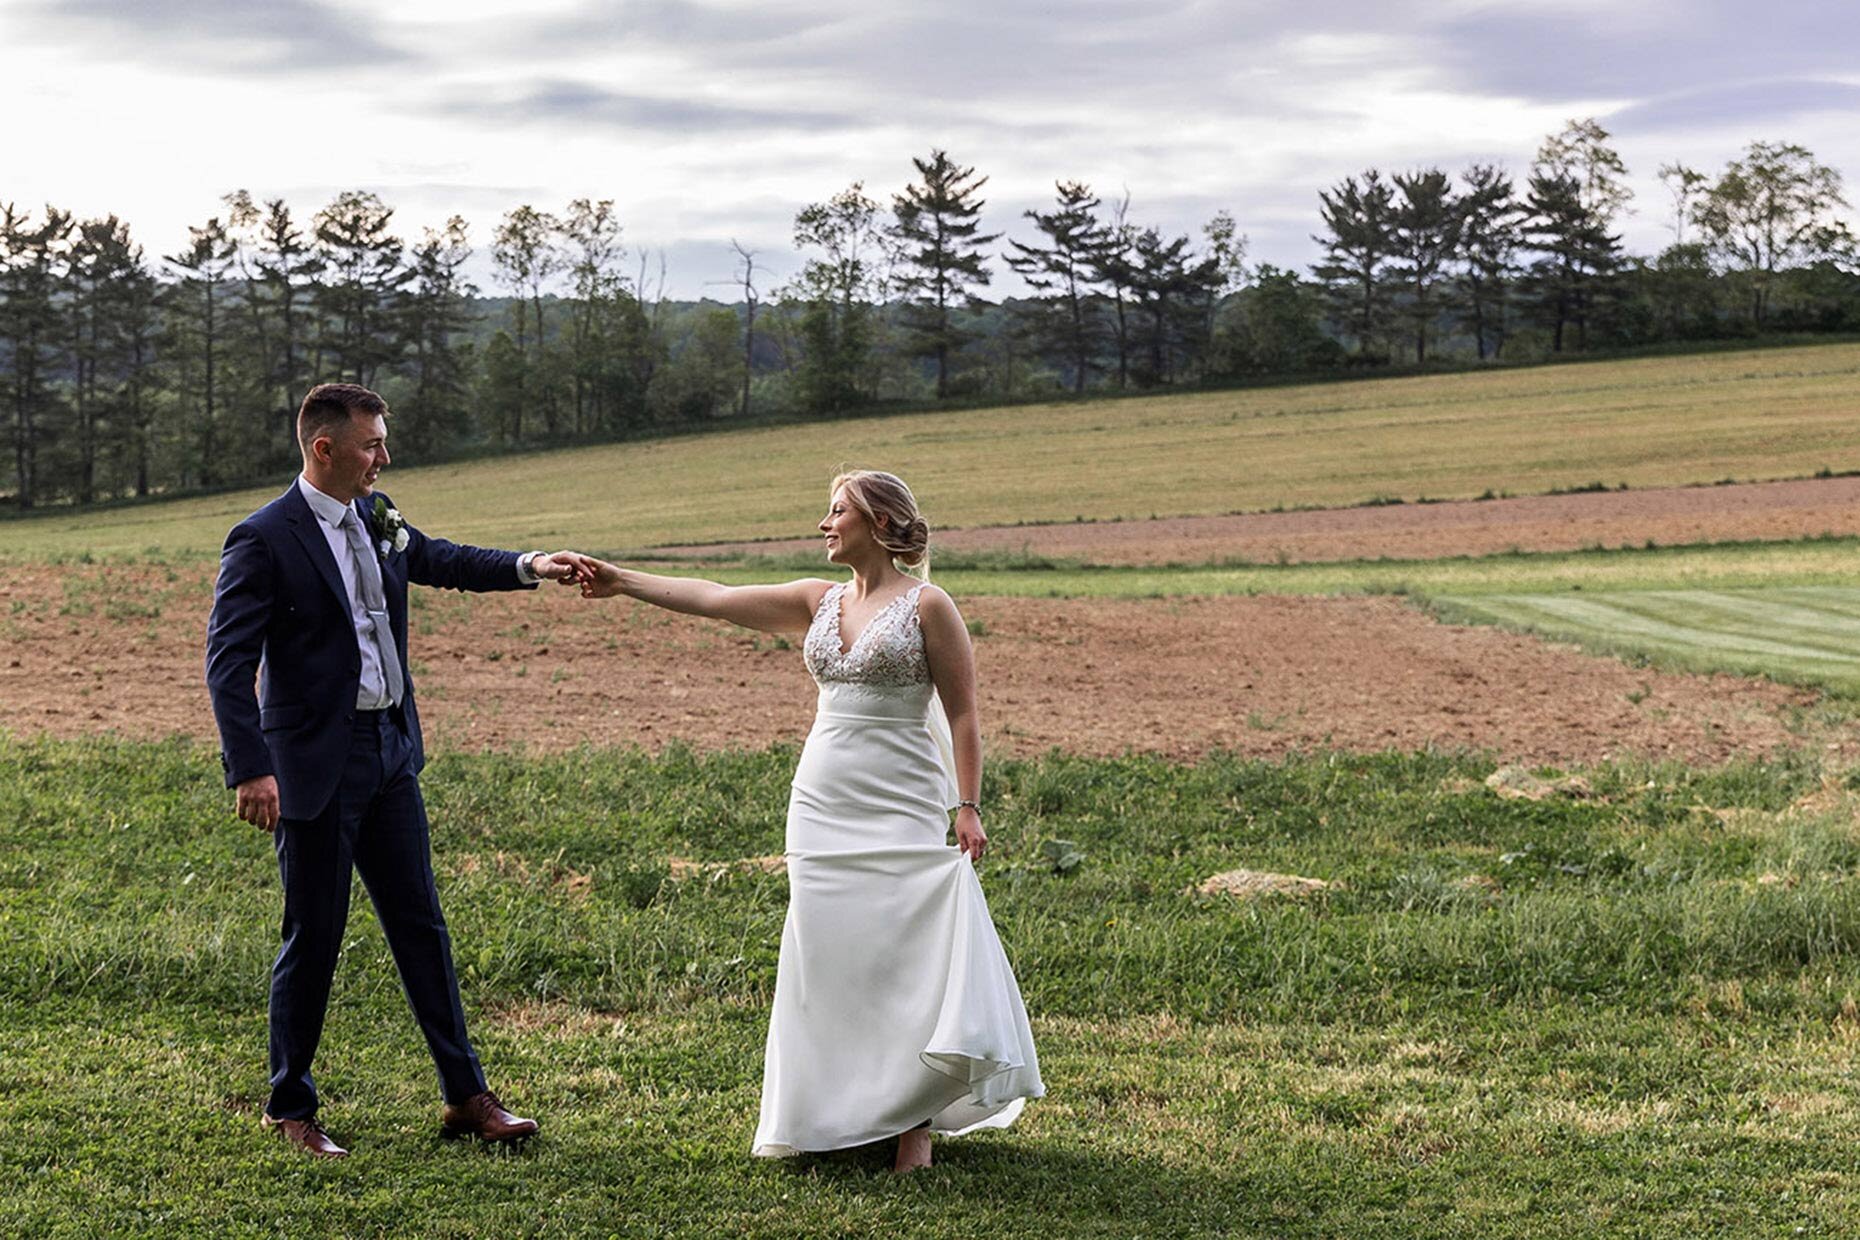 Bride &amp; Groom dancing in a field Couple Photos Lily Manor Wedding Central Mifflin, PA 